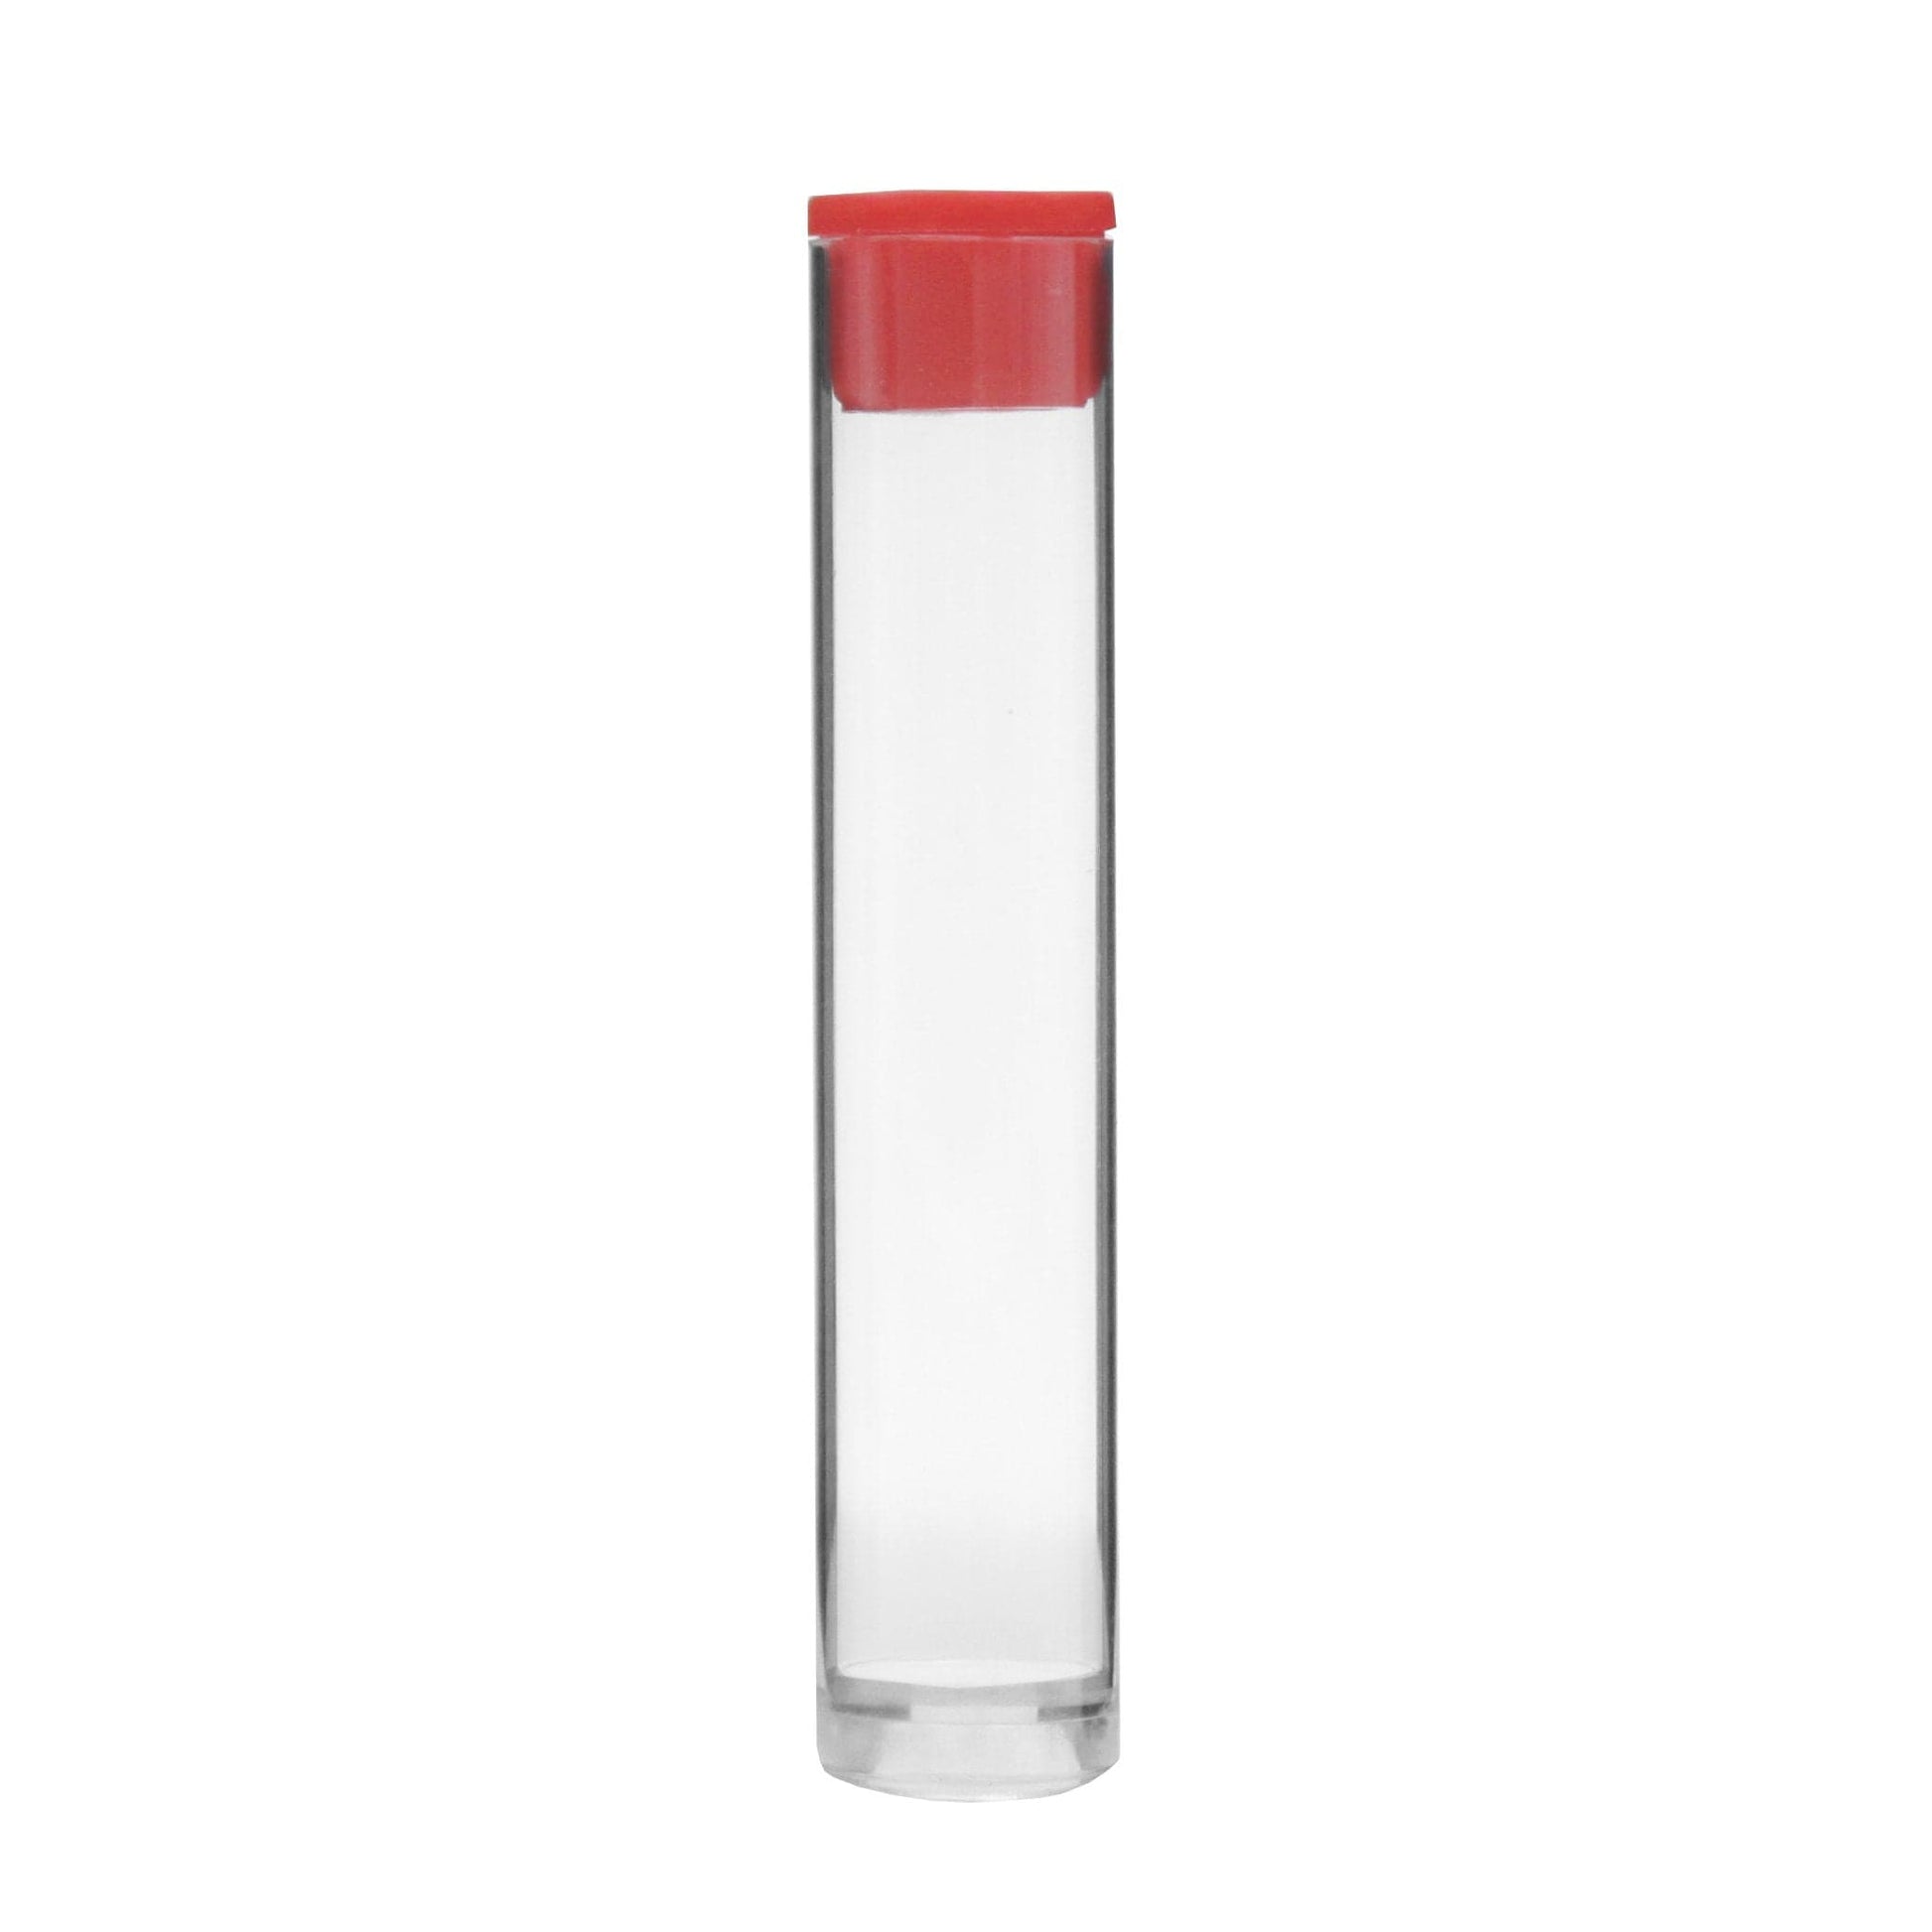 Red Plastic Tubes for Cartridges 12mm x 81mm